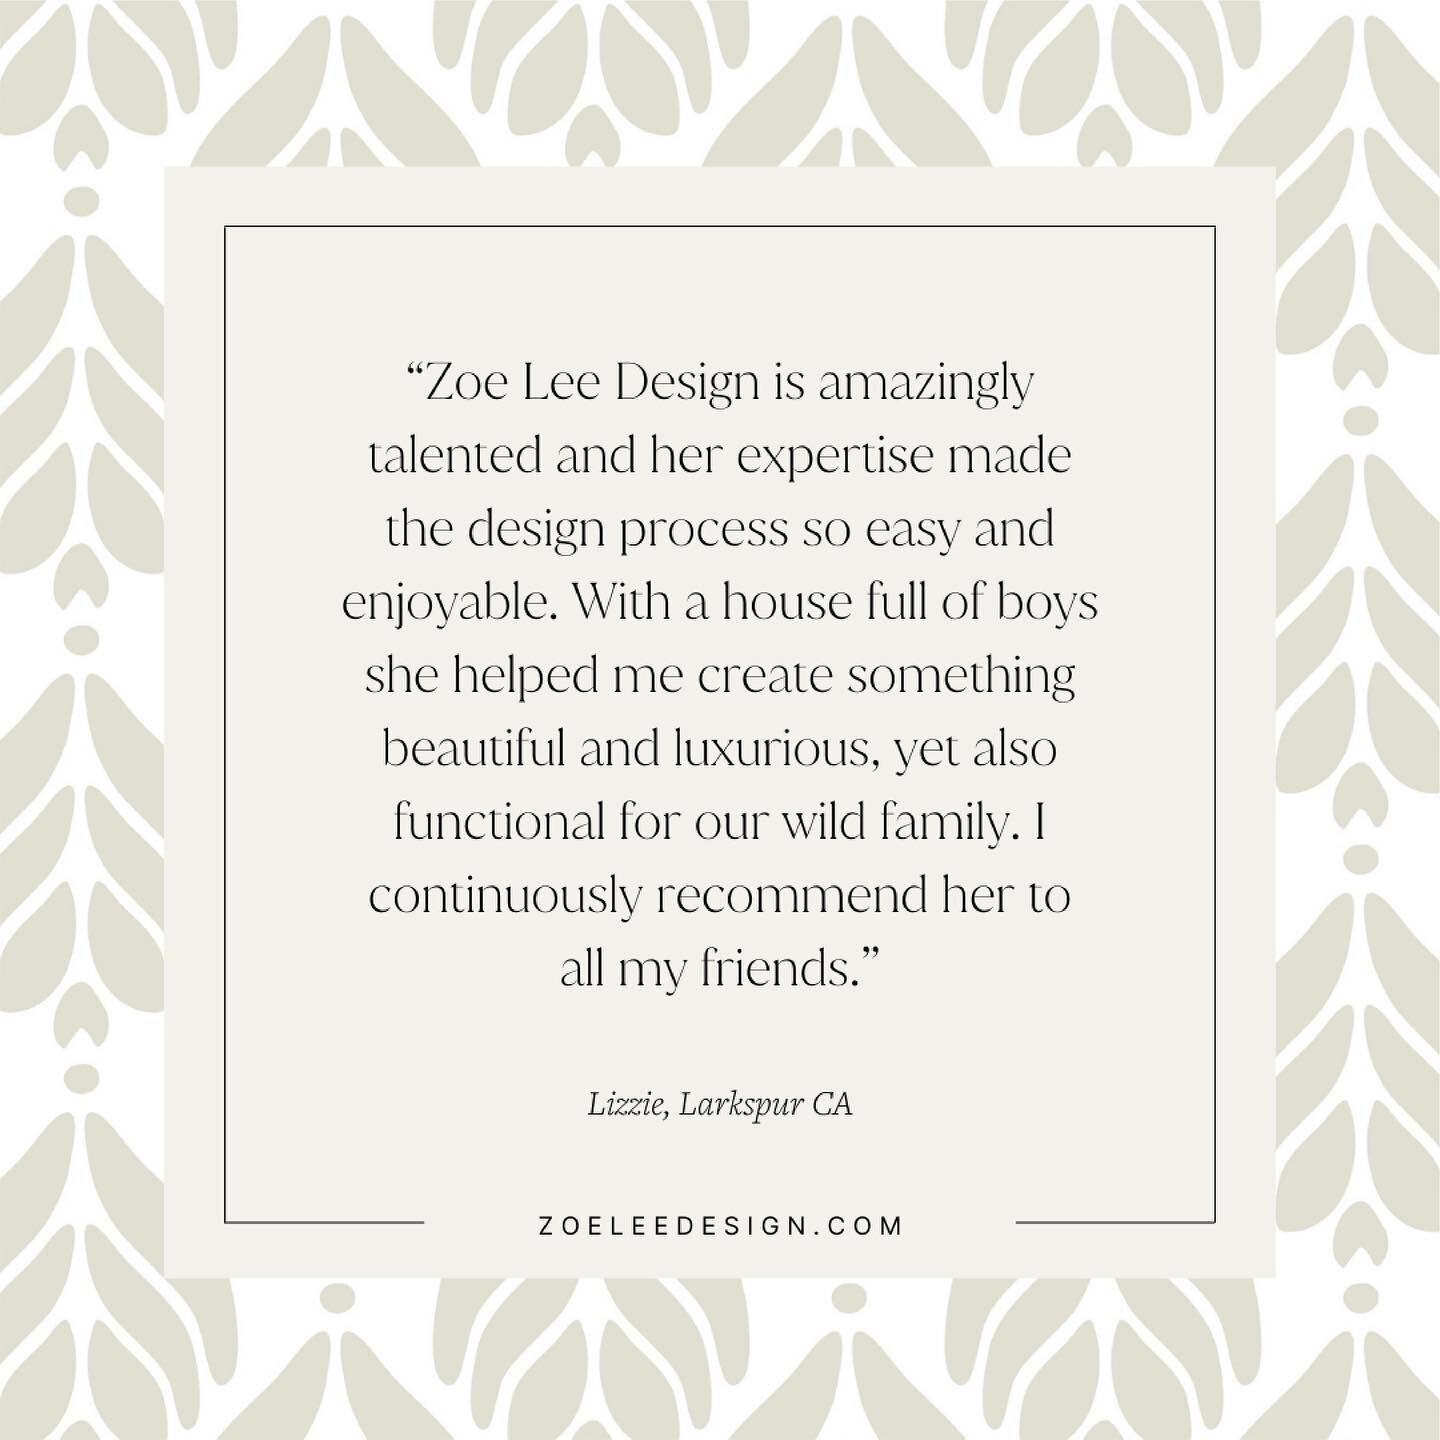 We love getting feedback from our clients! 🤍

We pride ourselves on creating spaces that are not only beautiful but that are functional for your family and &ldquo;life-friendly&rdquo;.